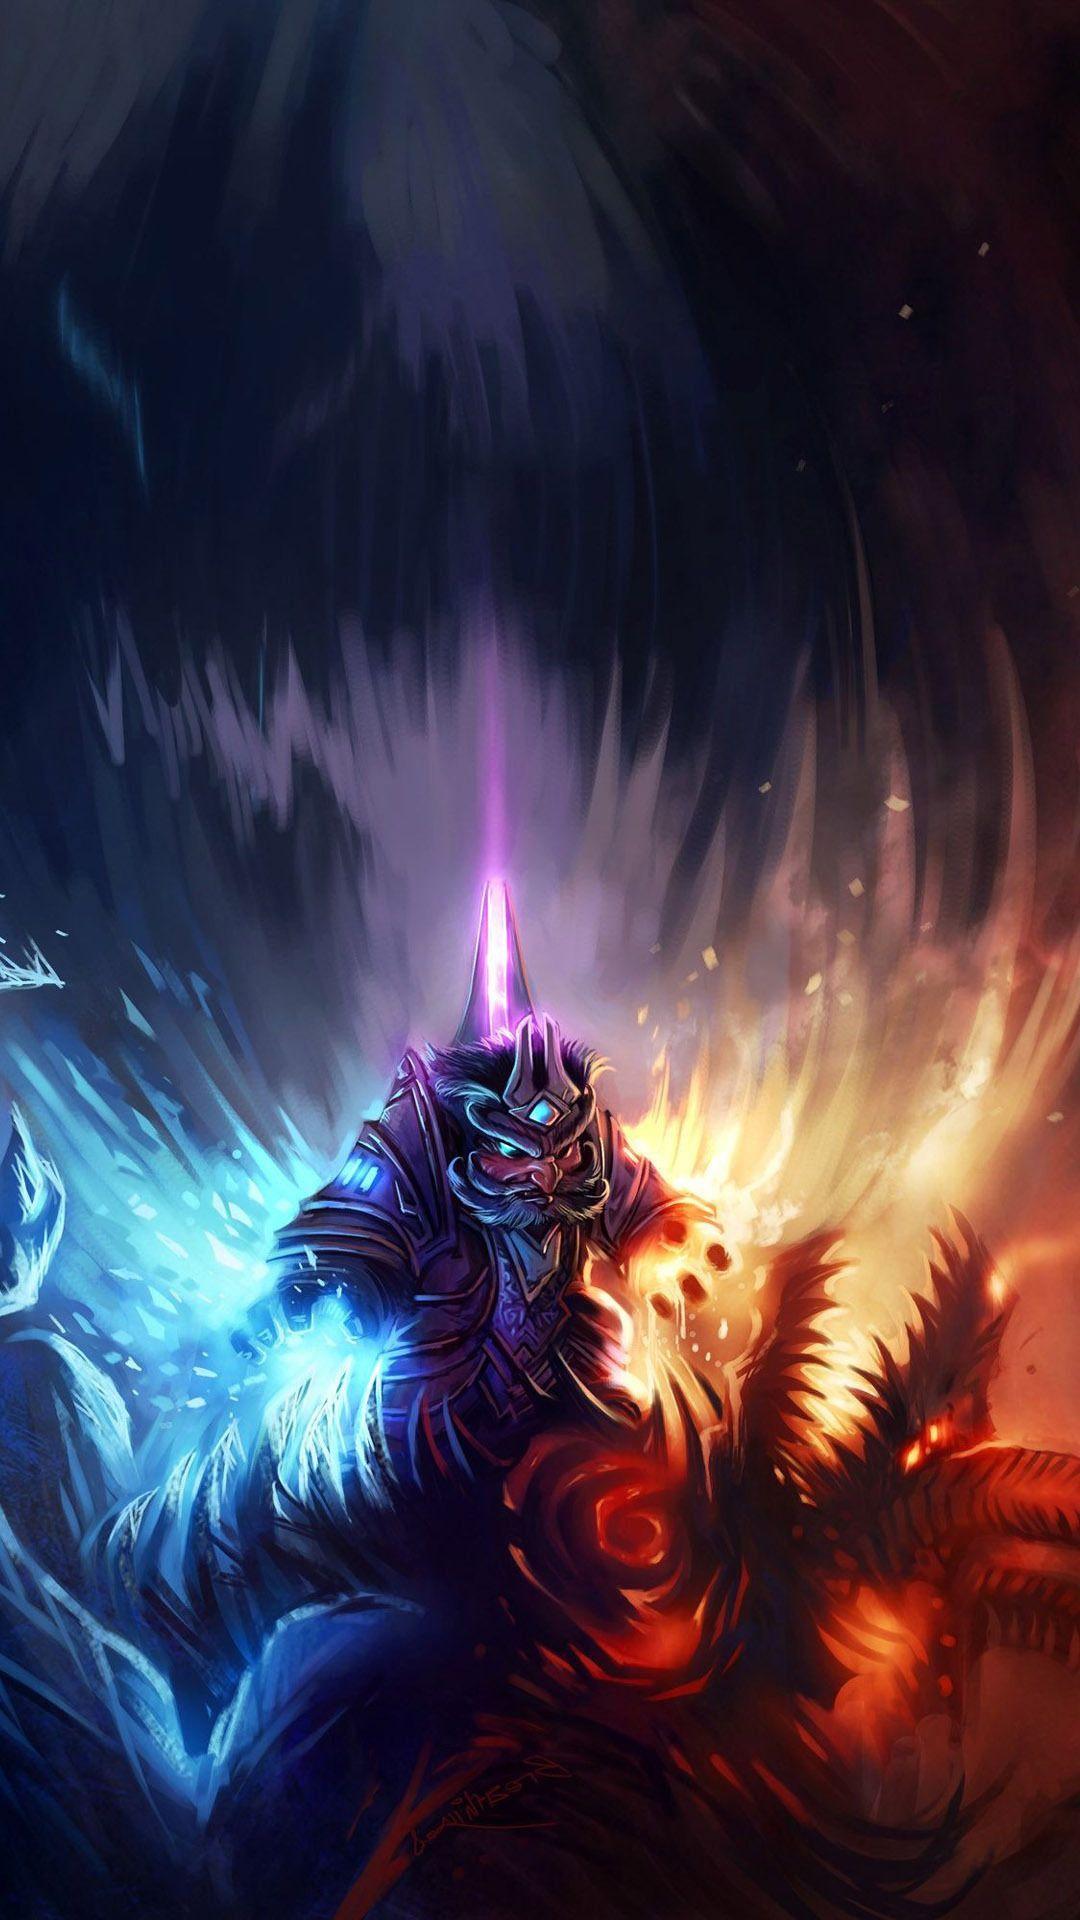 World Of Warcraft Cell Phone Wallpaper. World of warcraft